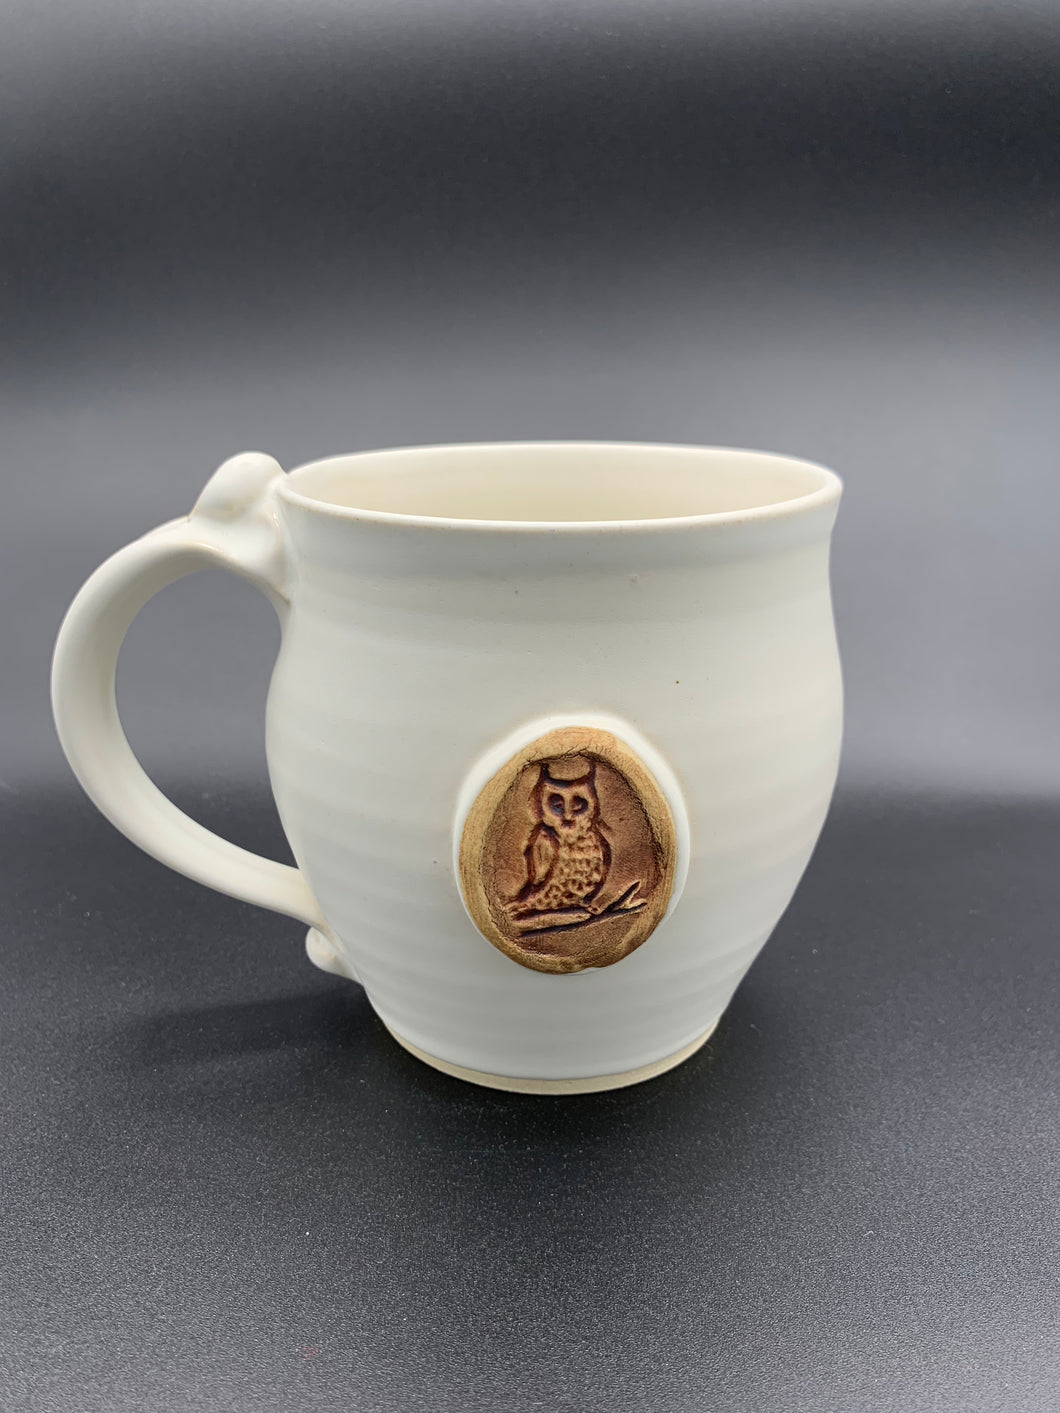 Latte/soup mug - the wise old owl of the Dunk River.